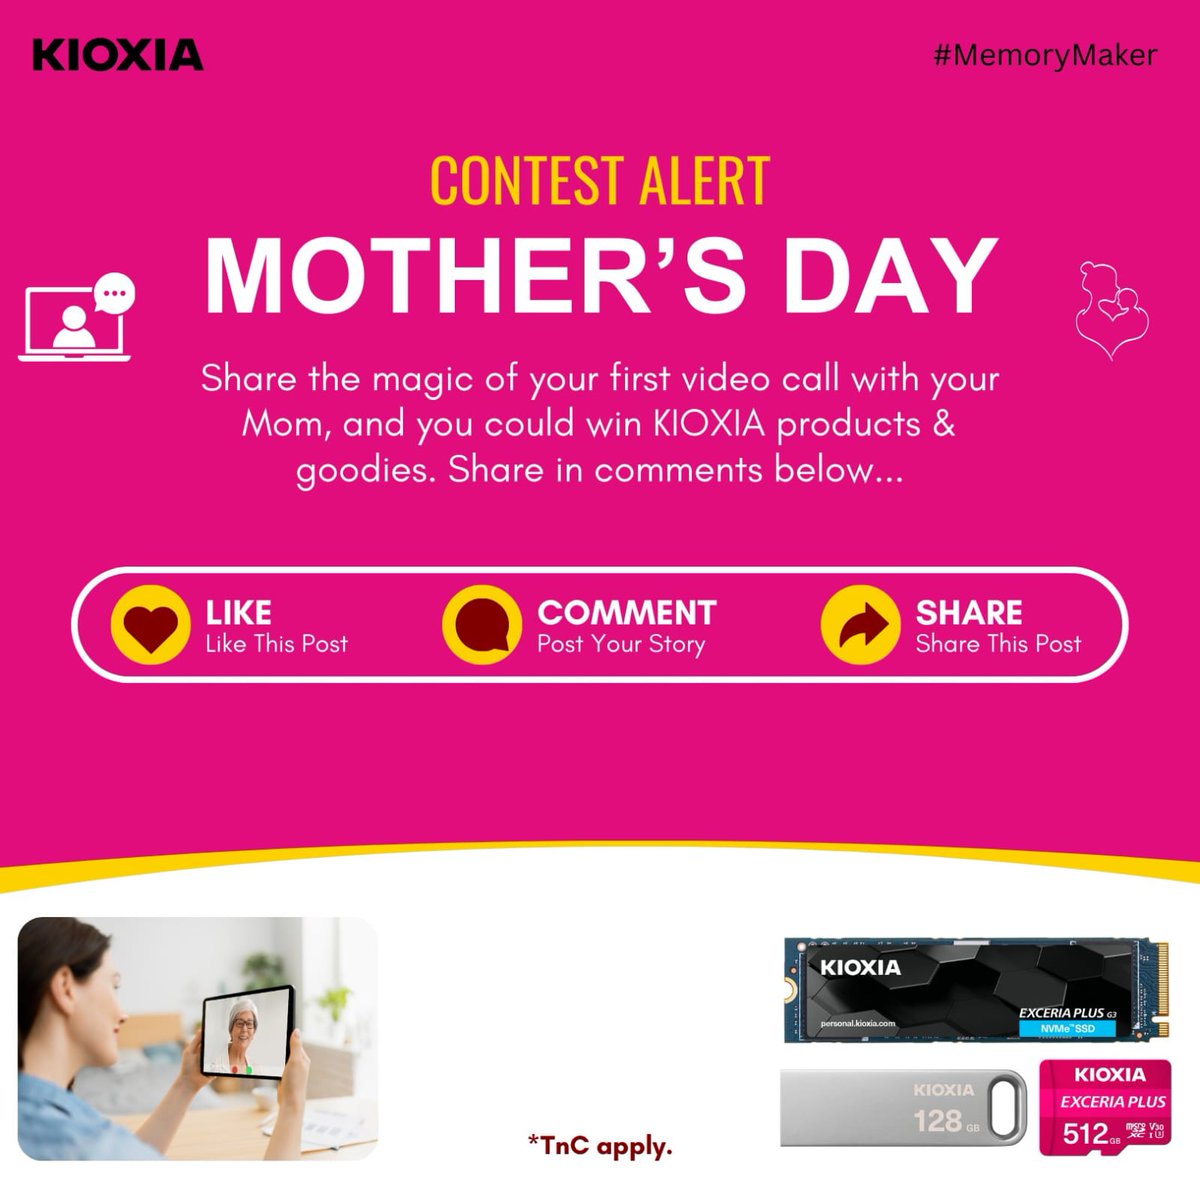 Innovation meets heartwarming memories with KIOXIA Memory Maker. Share your first video call memory and stand a chance to win. KIOXIA Memory Maker @KioxiaAPAC